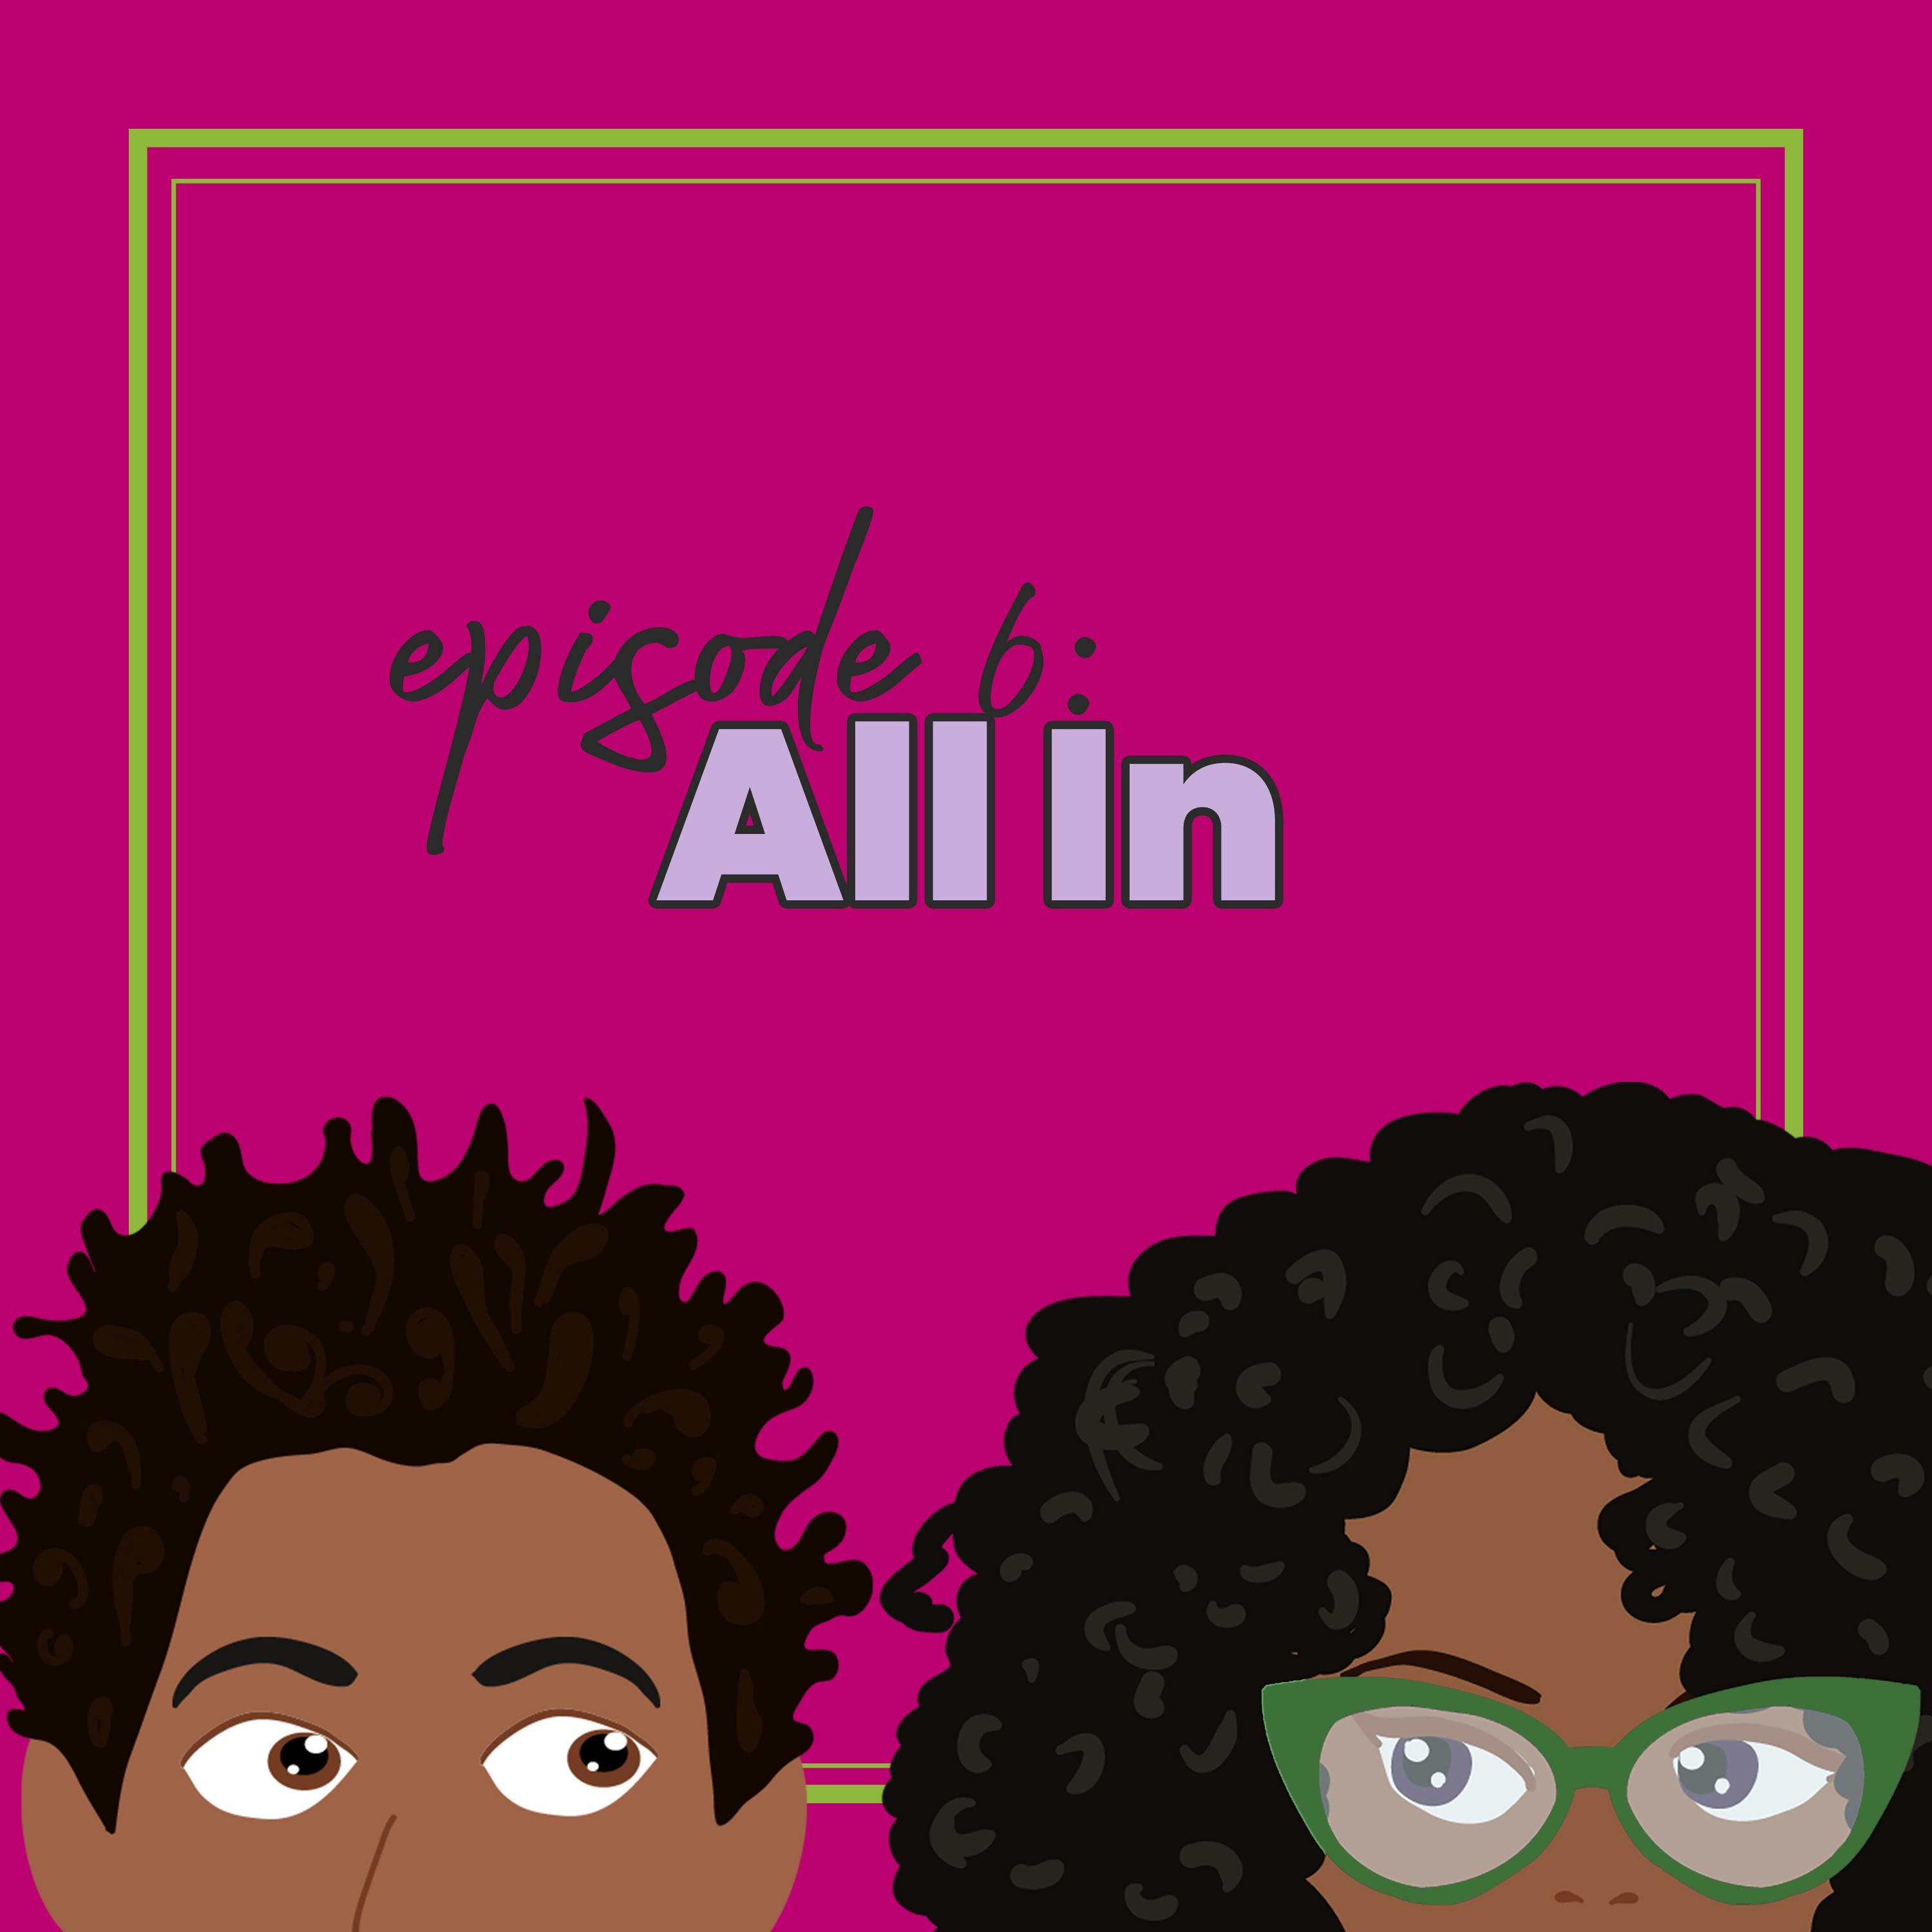 Episode 6: All In